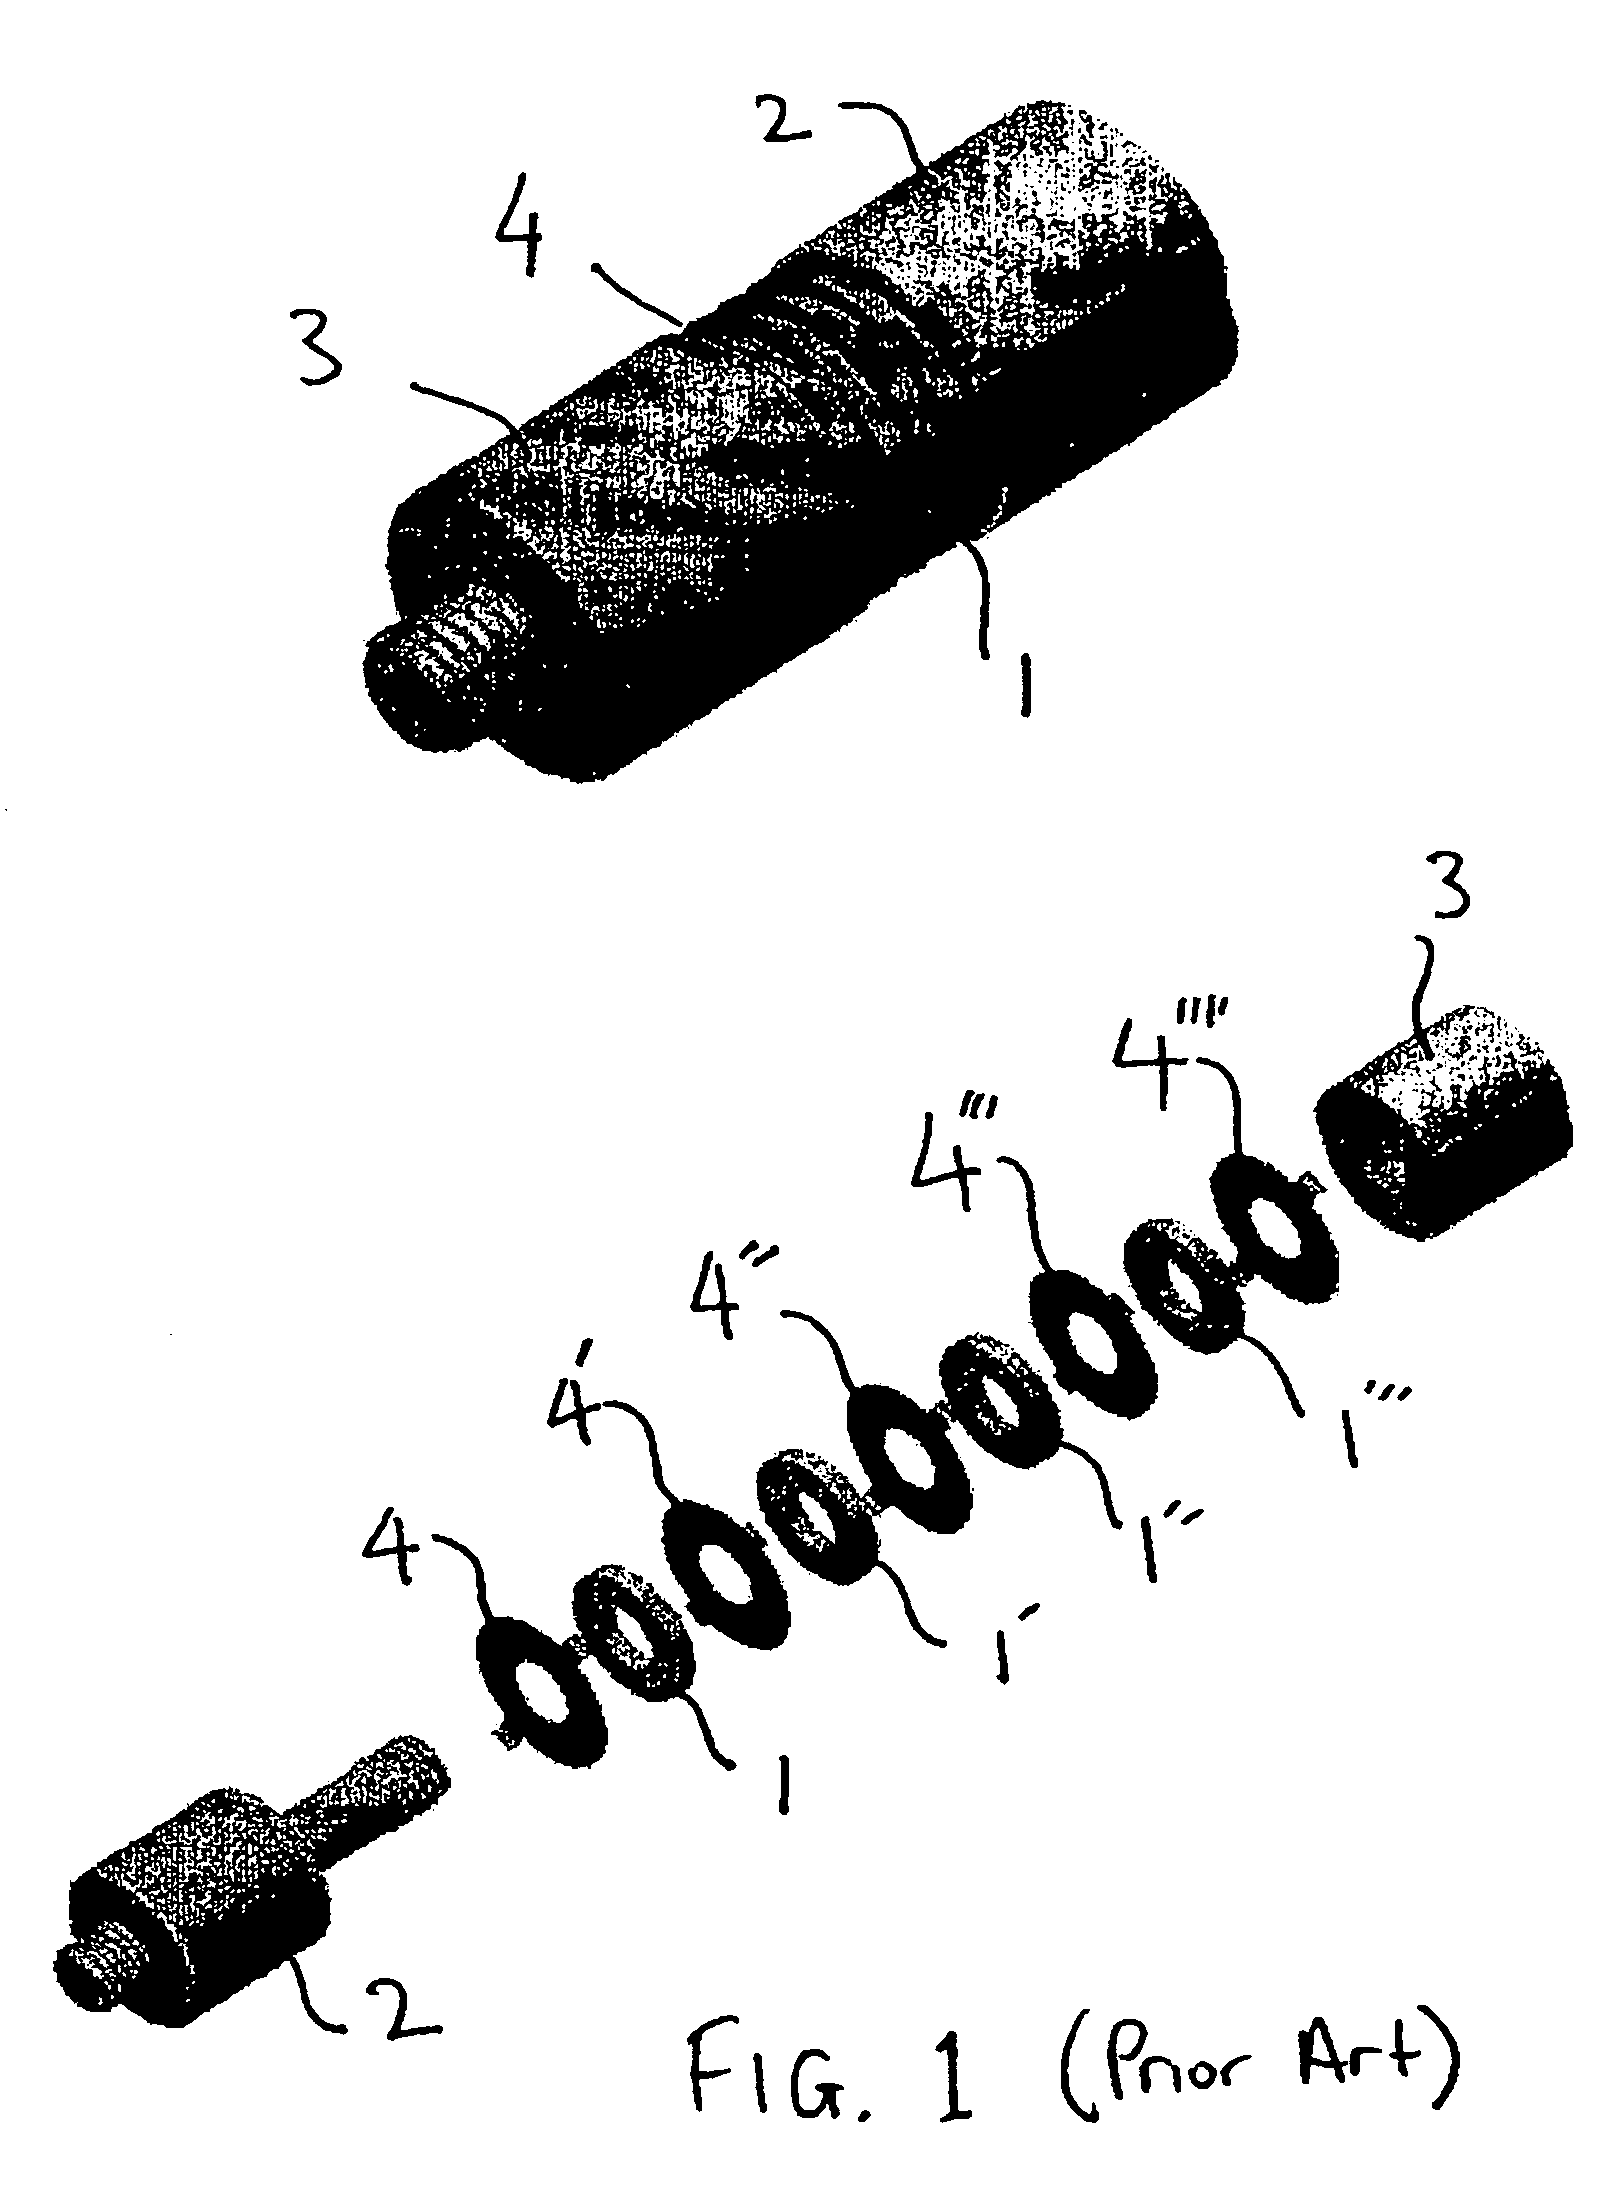 Driver for an ultrasonic transducer and an ultrasonic transducer